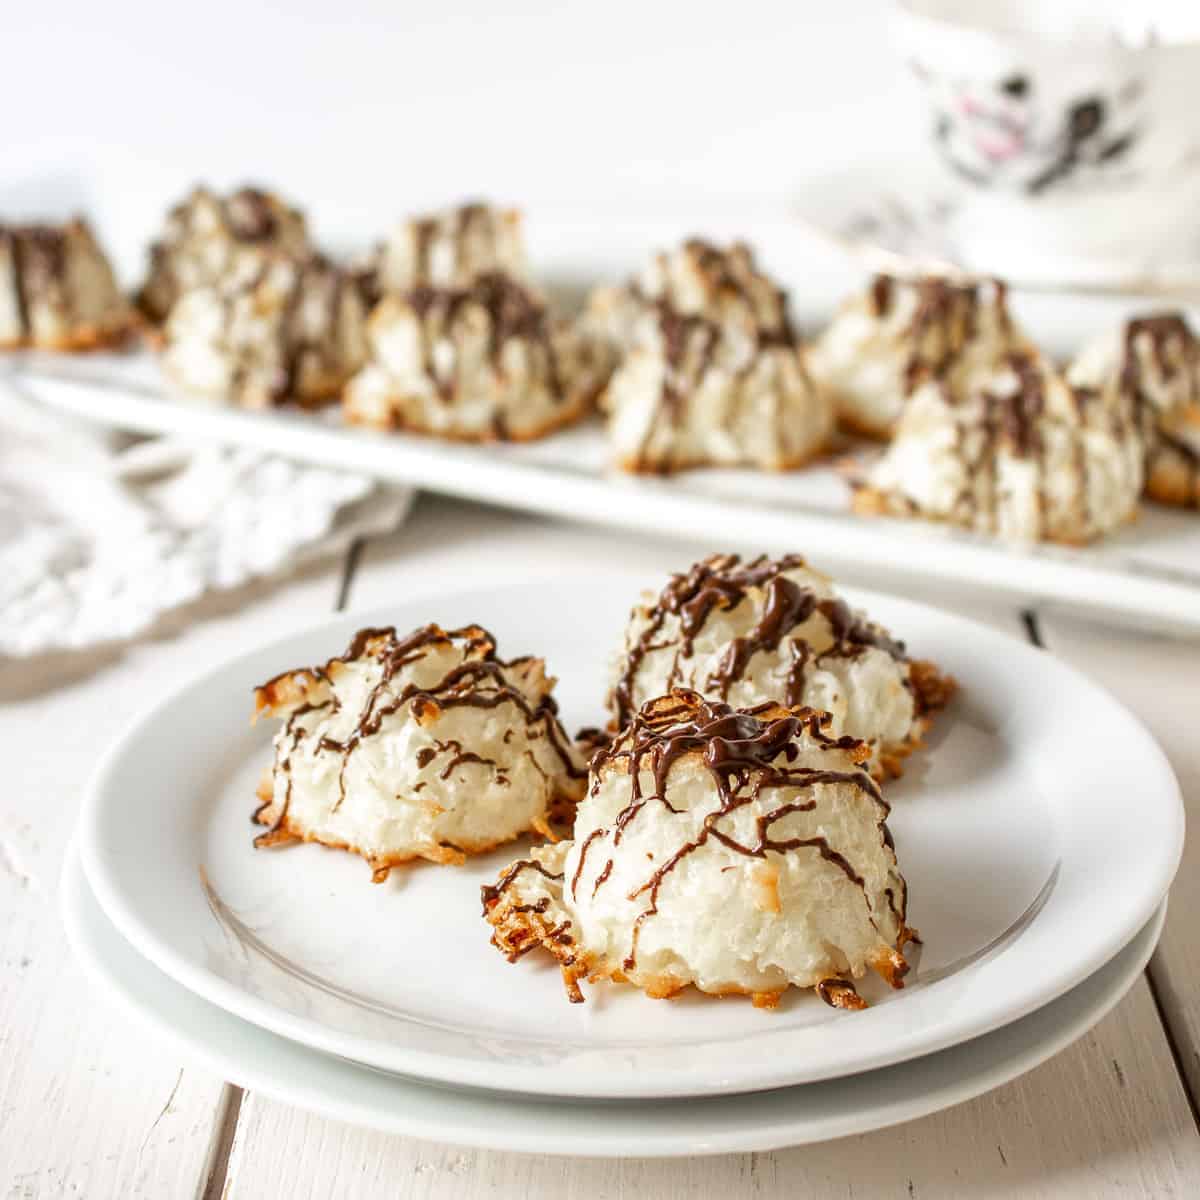 Three coconut macaroon cookies with a chocolate drizzle across the top.